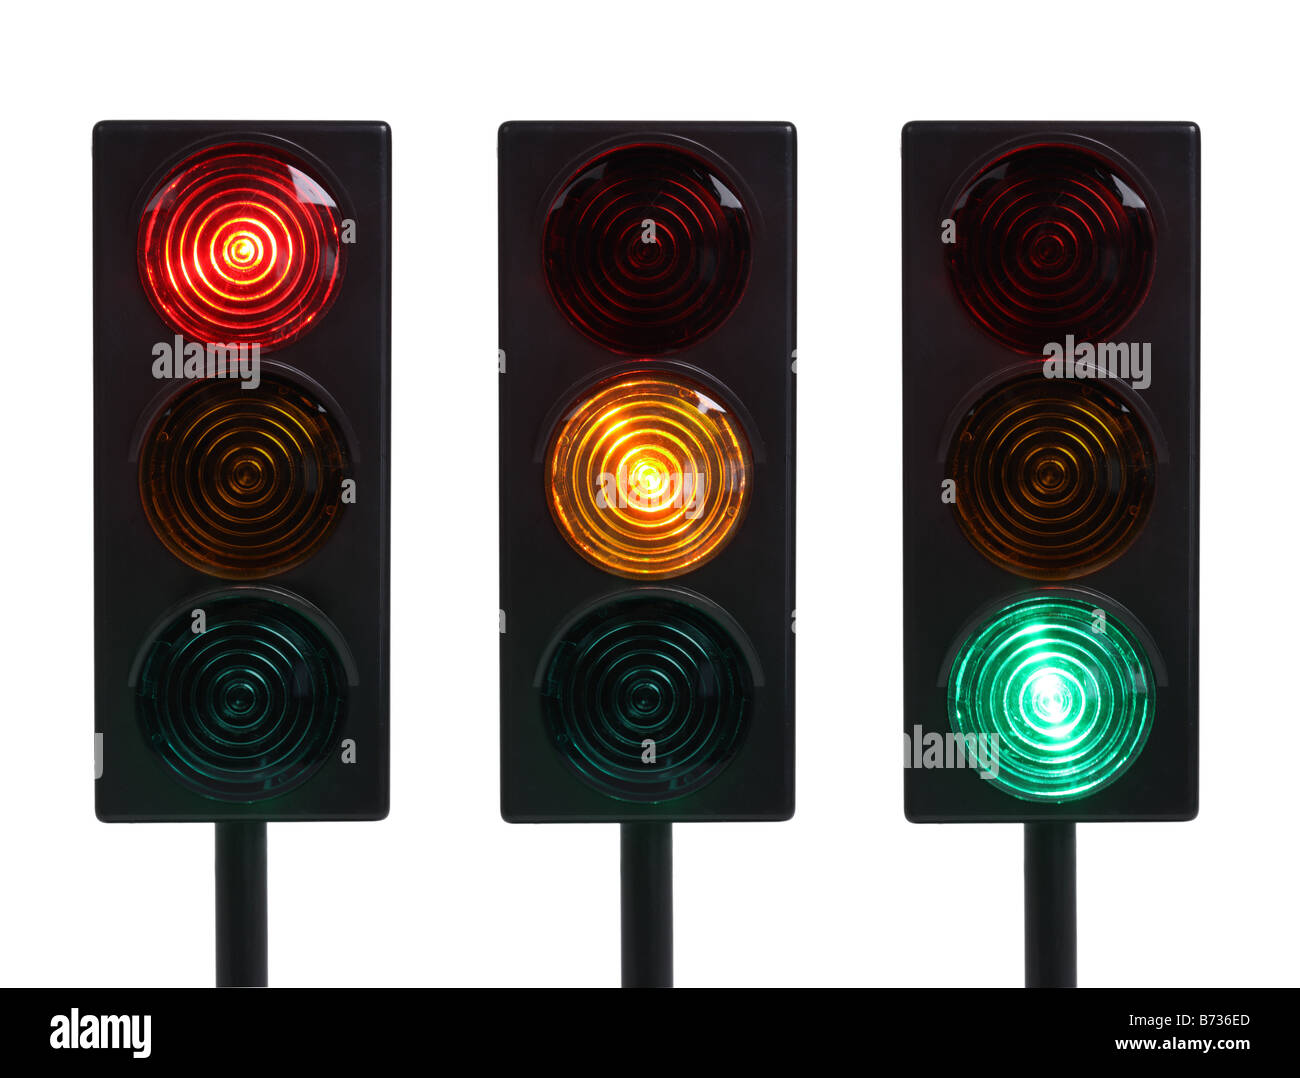 Three traffic lights with red yellow and green lights cut out on white background Stock Photo